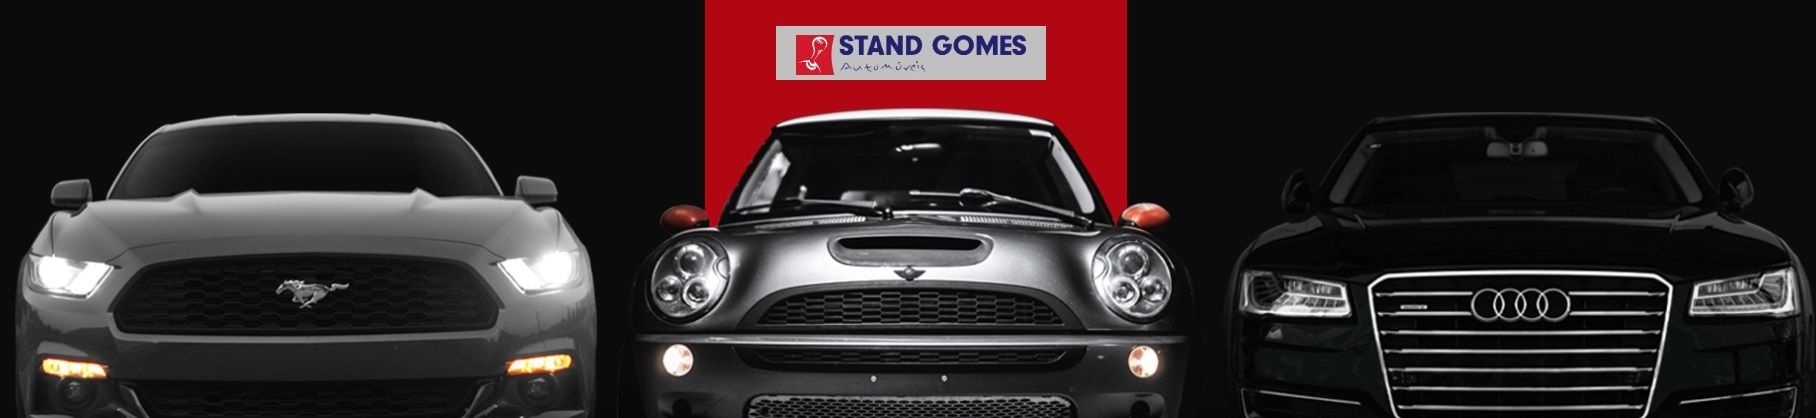 Stand Gomes top banner